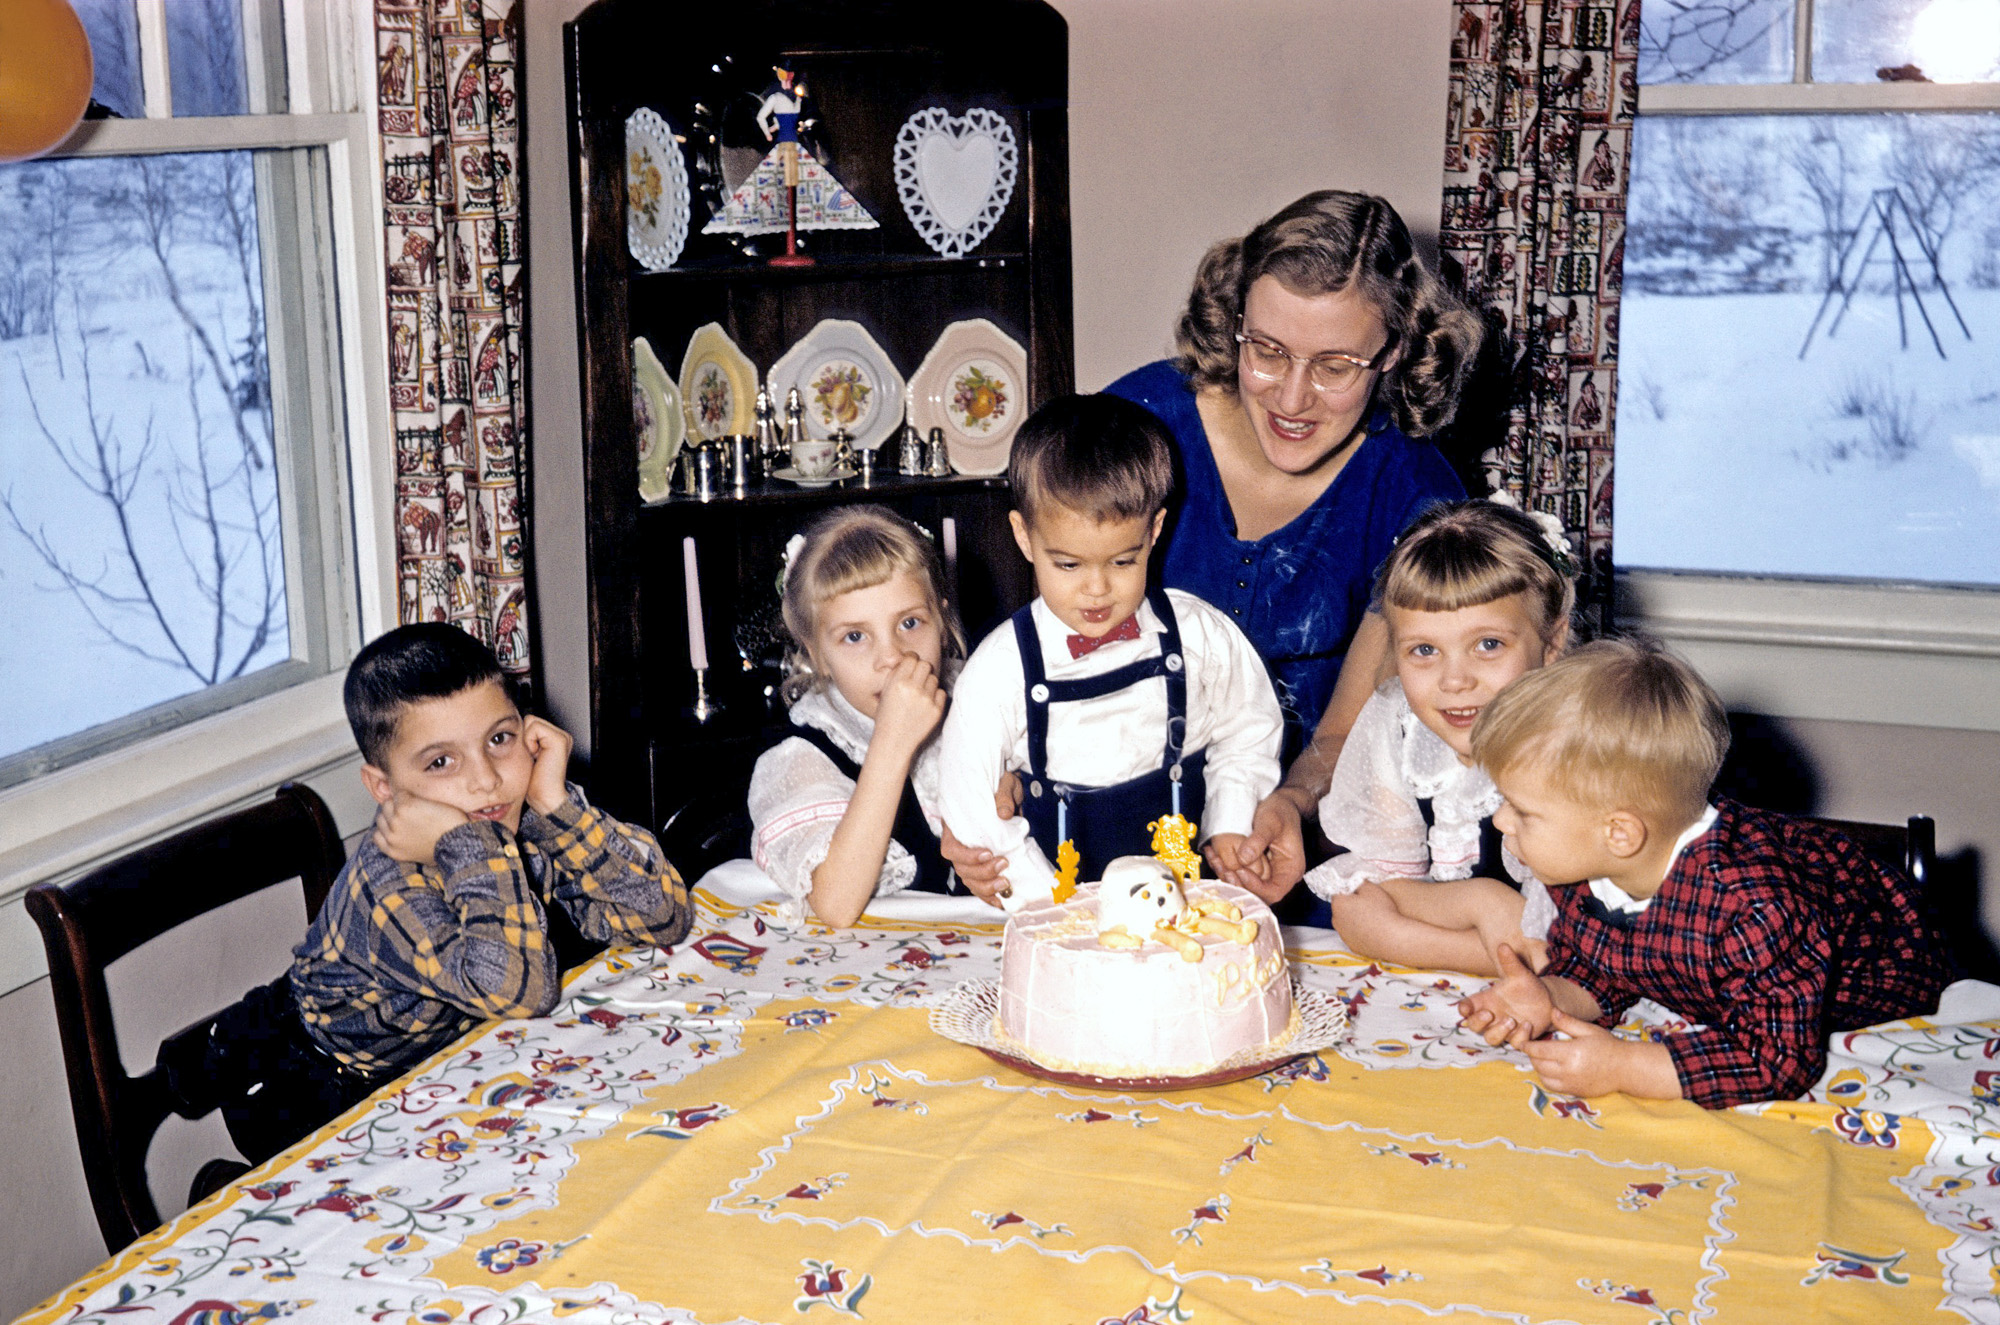 March 1958, my older brother's second birthday. Octopus (no: I'm emending this to Humpty Dumpty) cake, with cousins surrounding. Folksy decor. Is the folksiness peculiar to my parents, who were international folk dancers? Or was it generally popular in that era? Bow ties. Kodachrome, taken on Minolta A range-finder. I've also posted a picture from his birthday a year earlier. View full size.